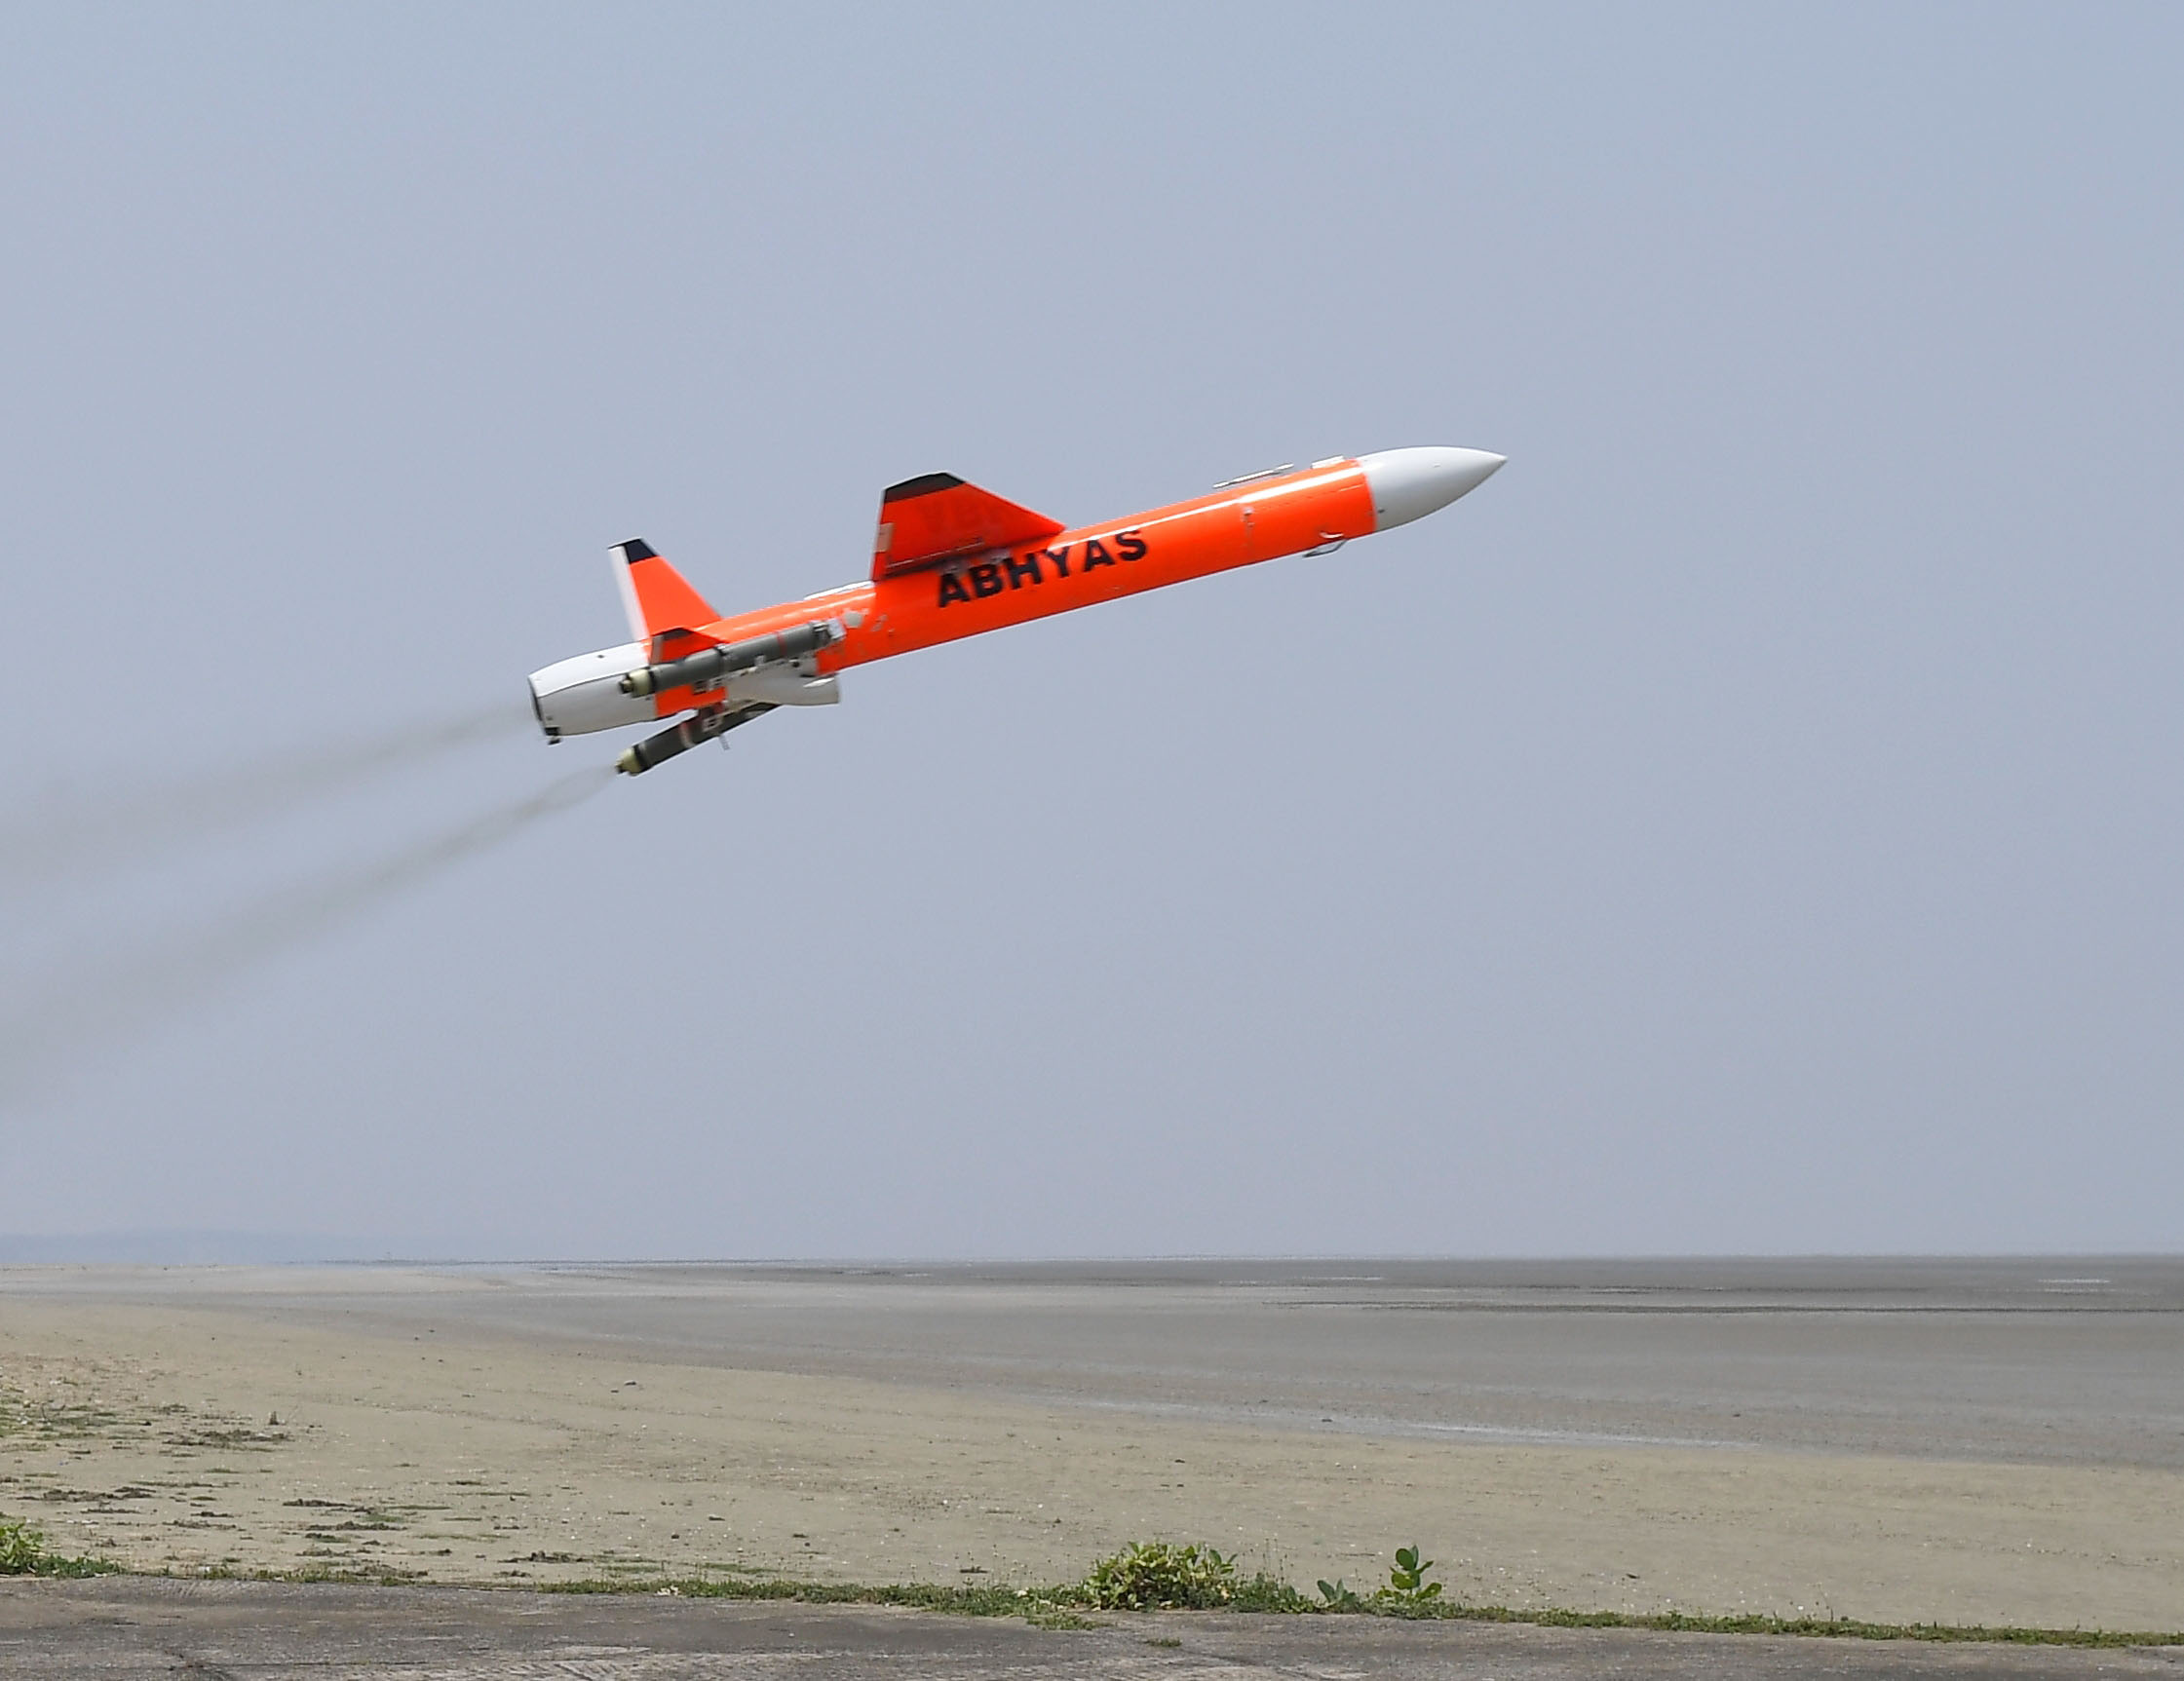 Defence Research and Development Organisation (DRDO) successfully conducts flight test of ABHYAS - High-speed Expendable Aerial Target (HEAT) from Interim Test Range, Chandipur, in Odisha on May 13, 2019.